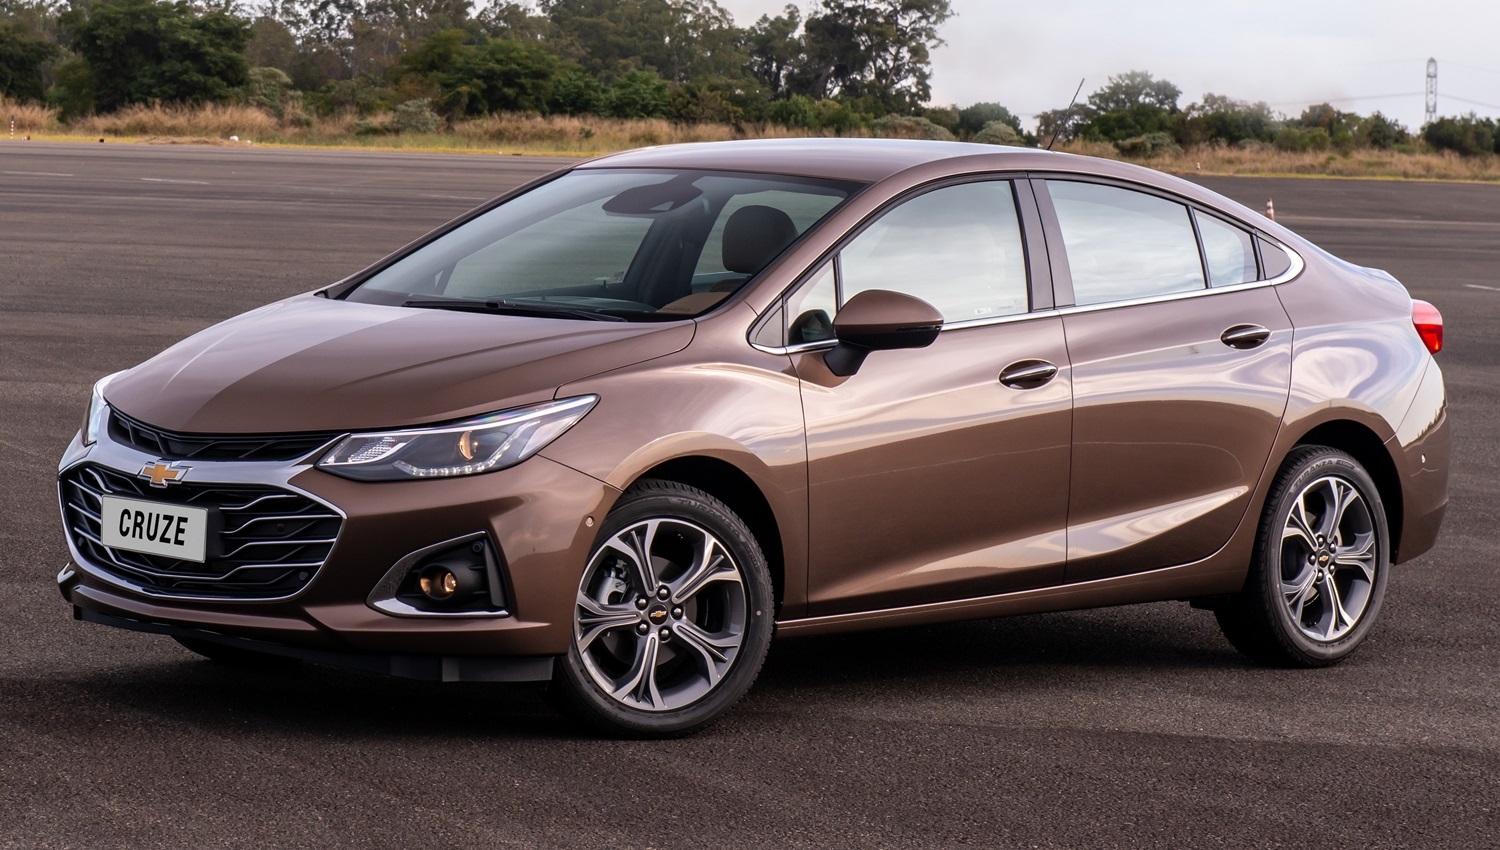 Refreshed 2021 Chevrolet Cruze Goes On Sale In Brazil